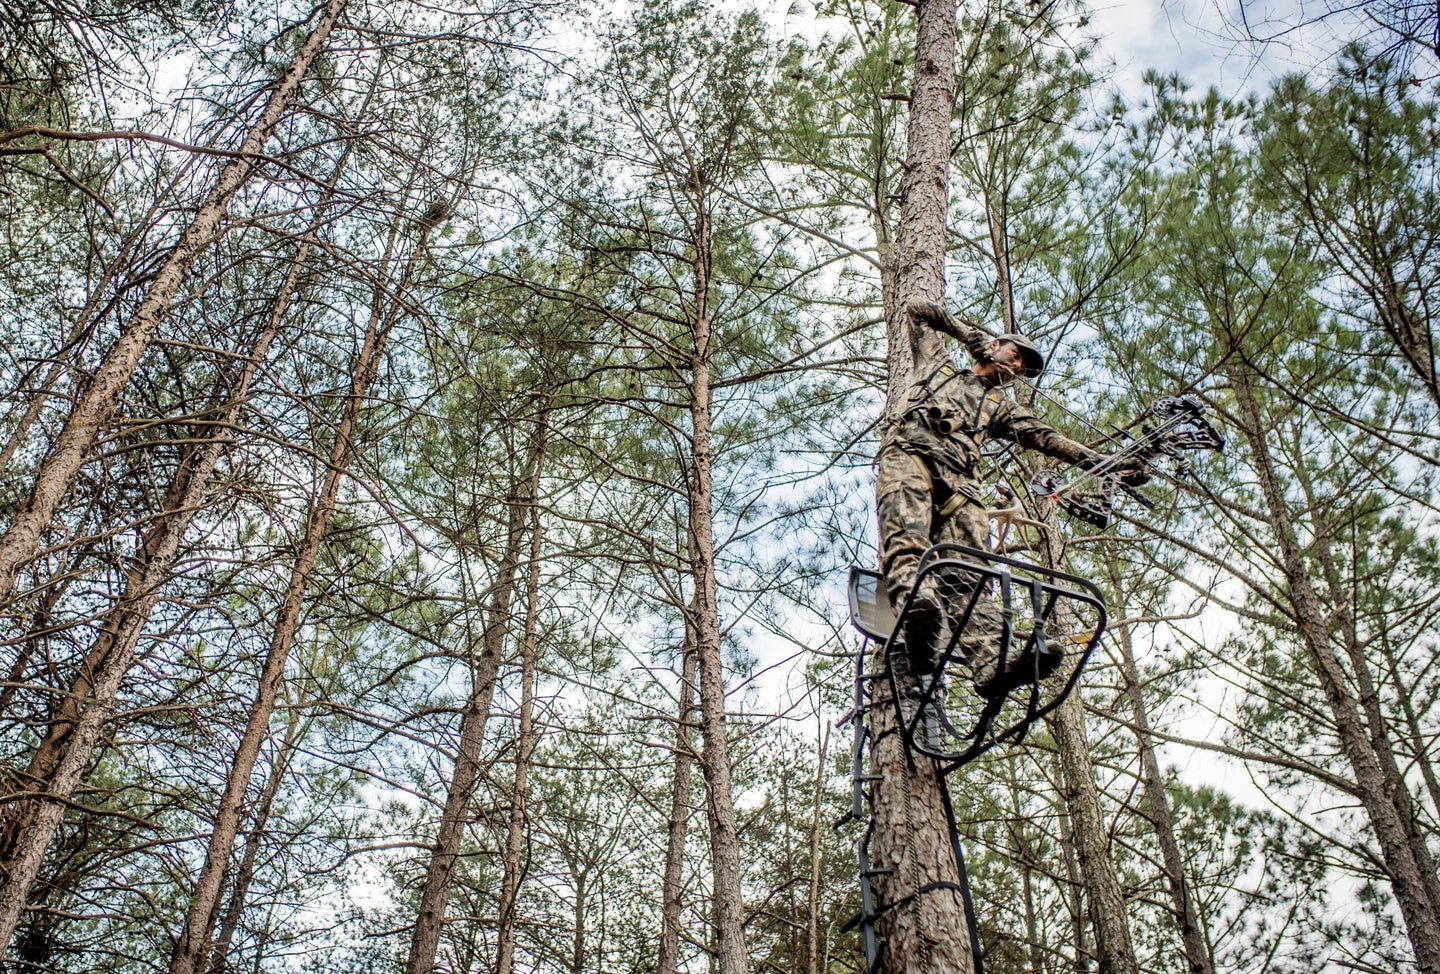 Bowhunter shooting from a treestand